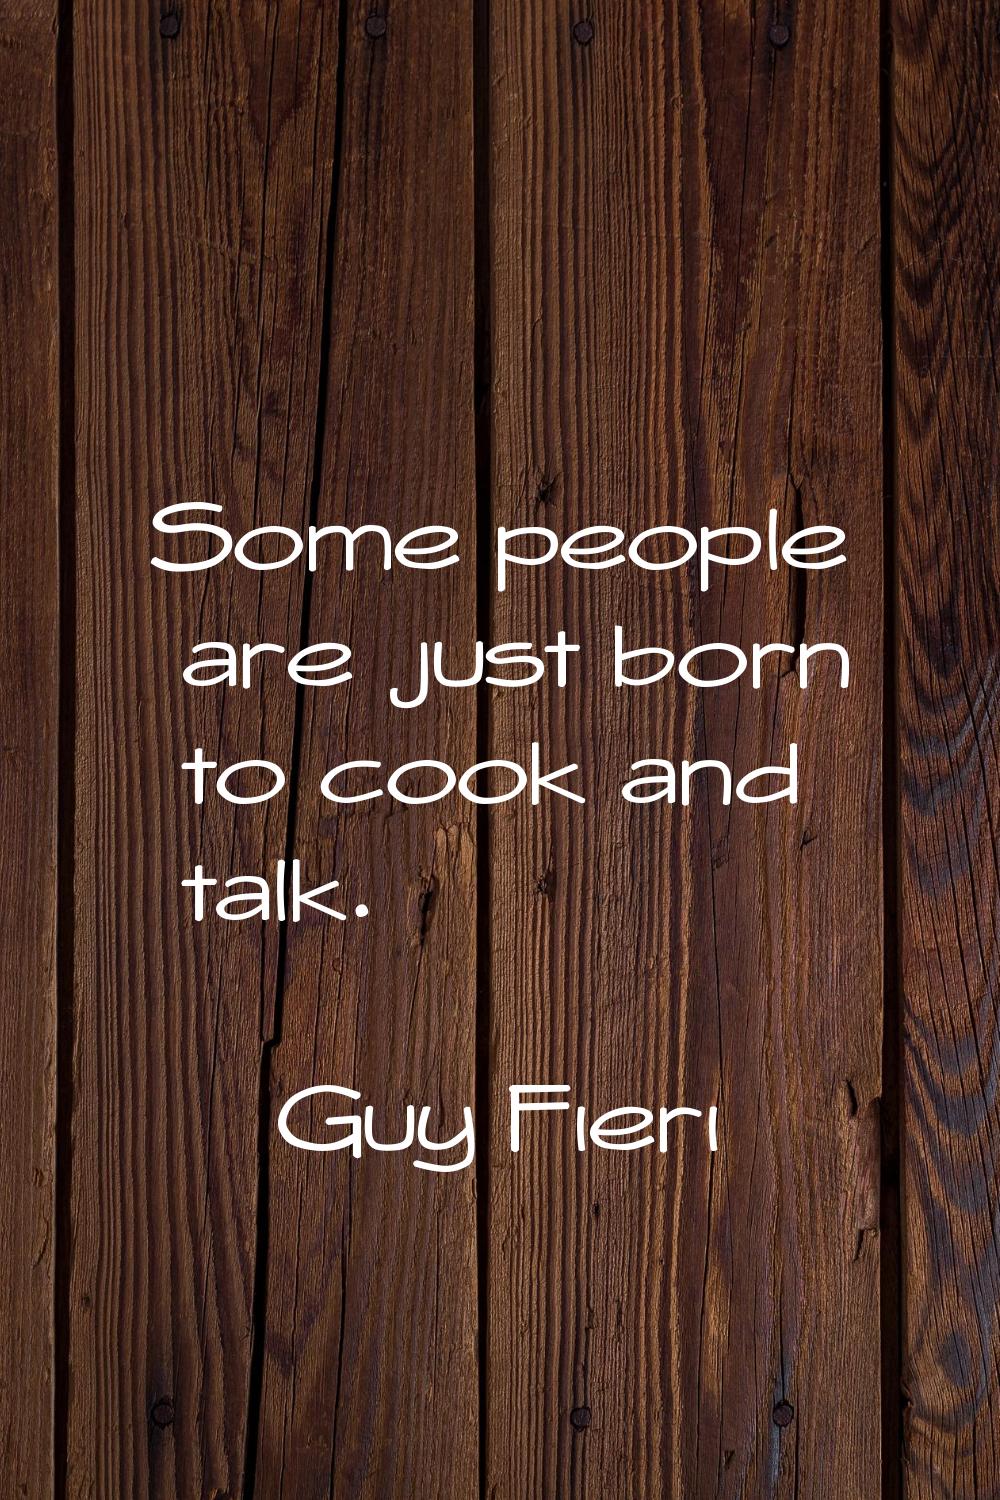 Some people are just born to cook and talk.